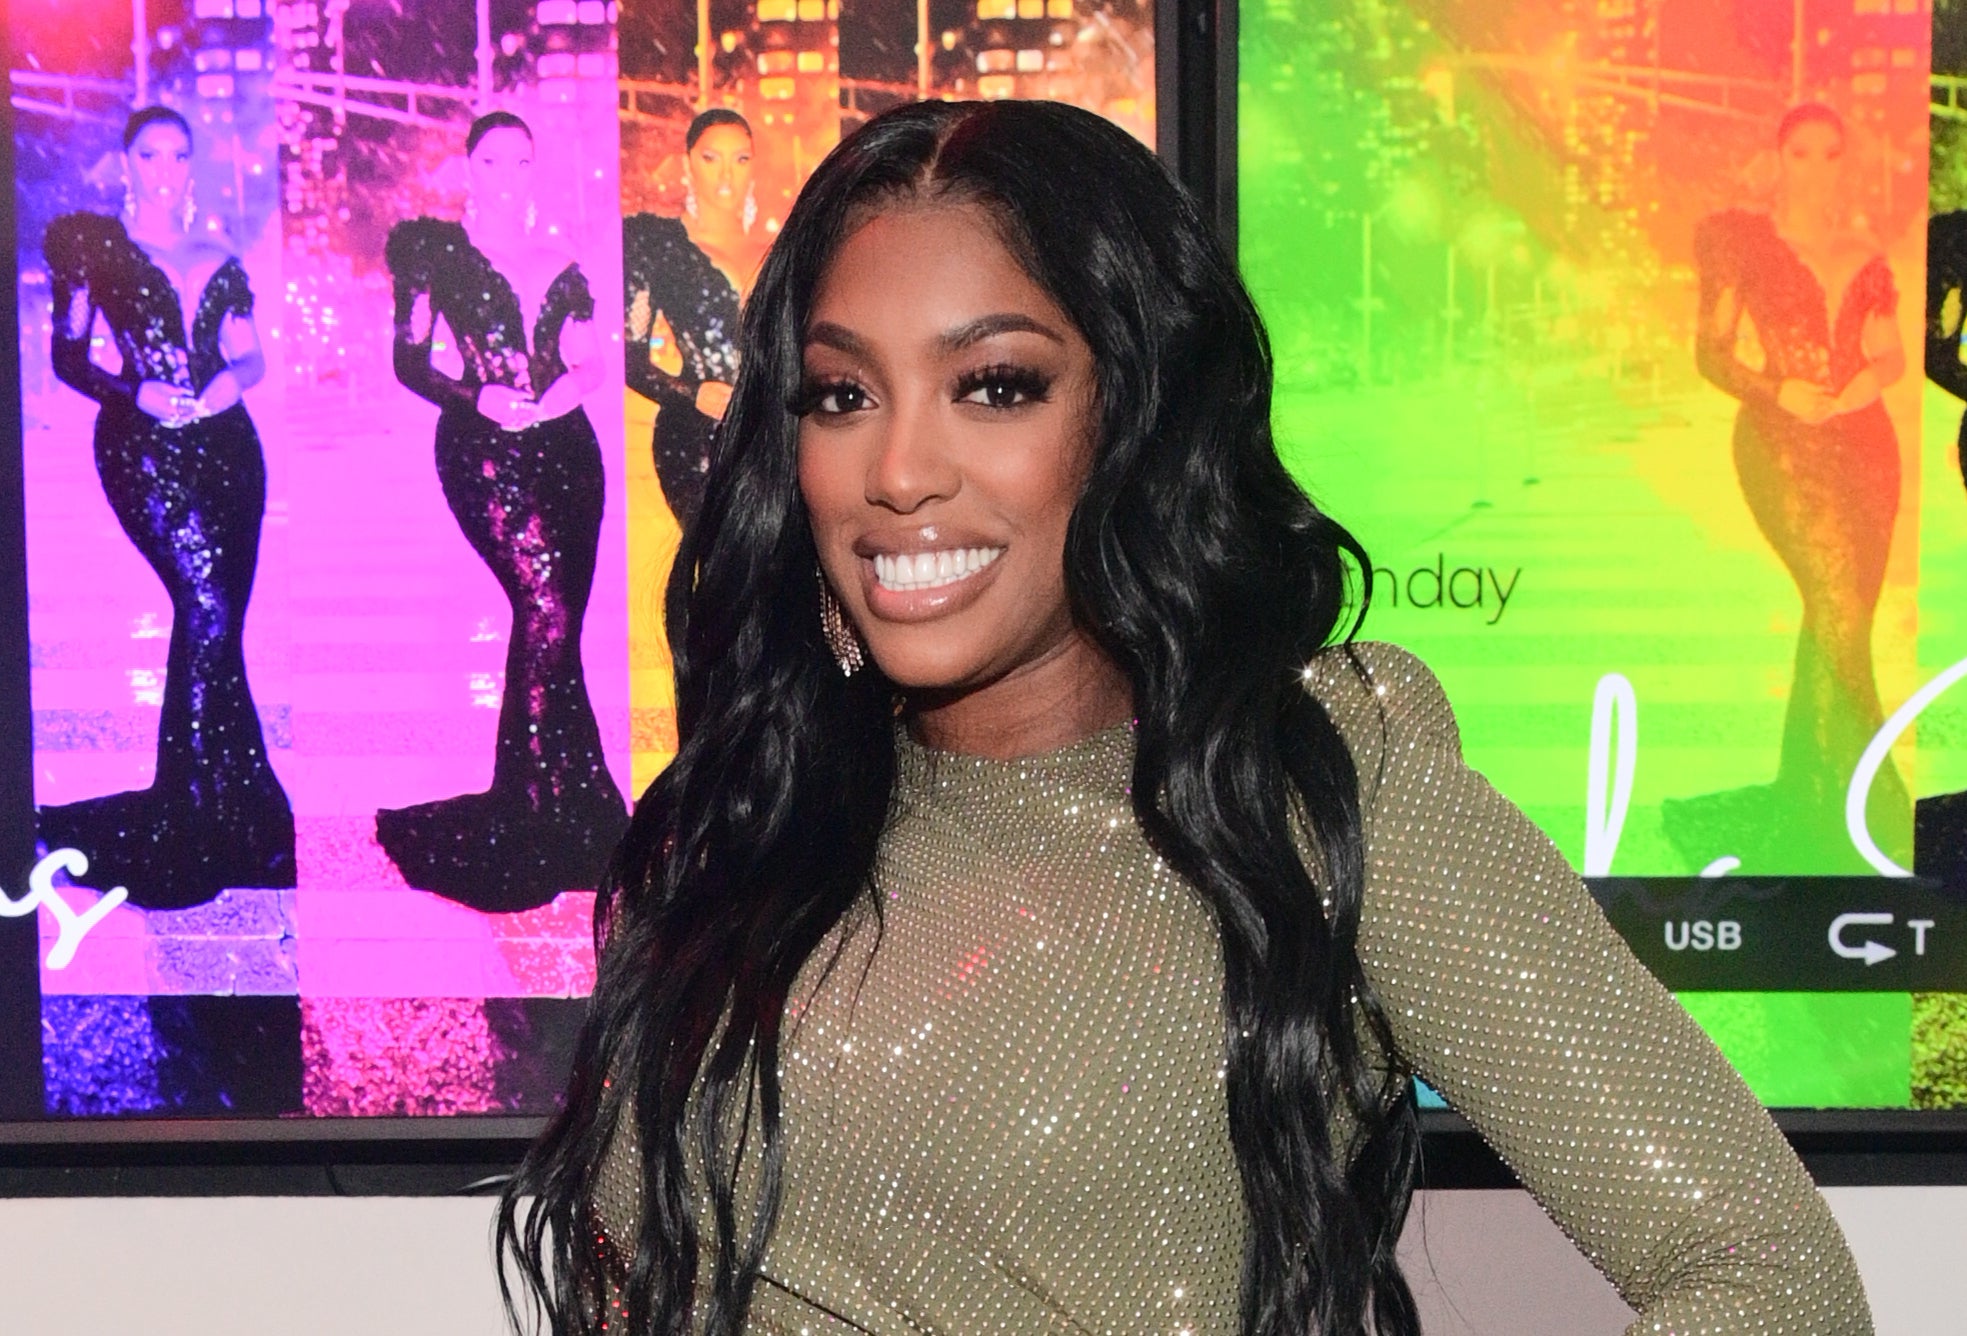 Porsha Williams Reveals Her Own Experience With R. Kelly And Her Attempt To Help Fellow Victims